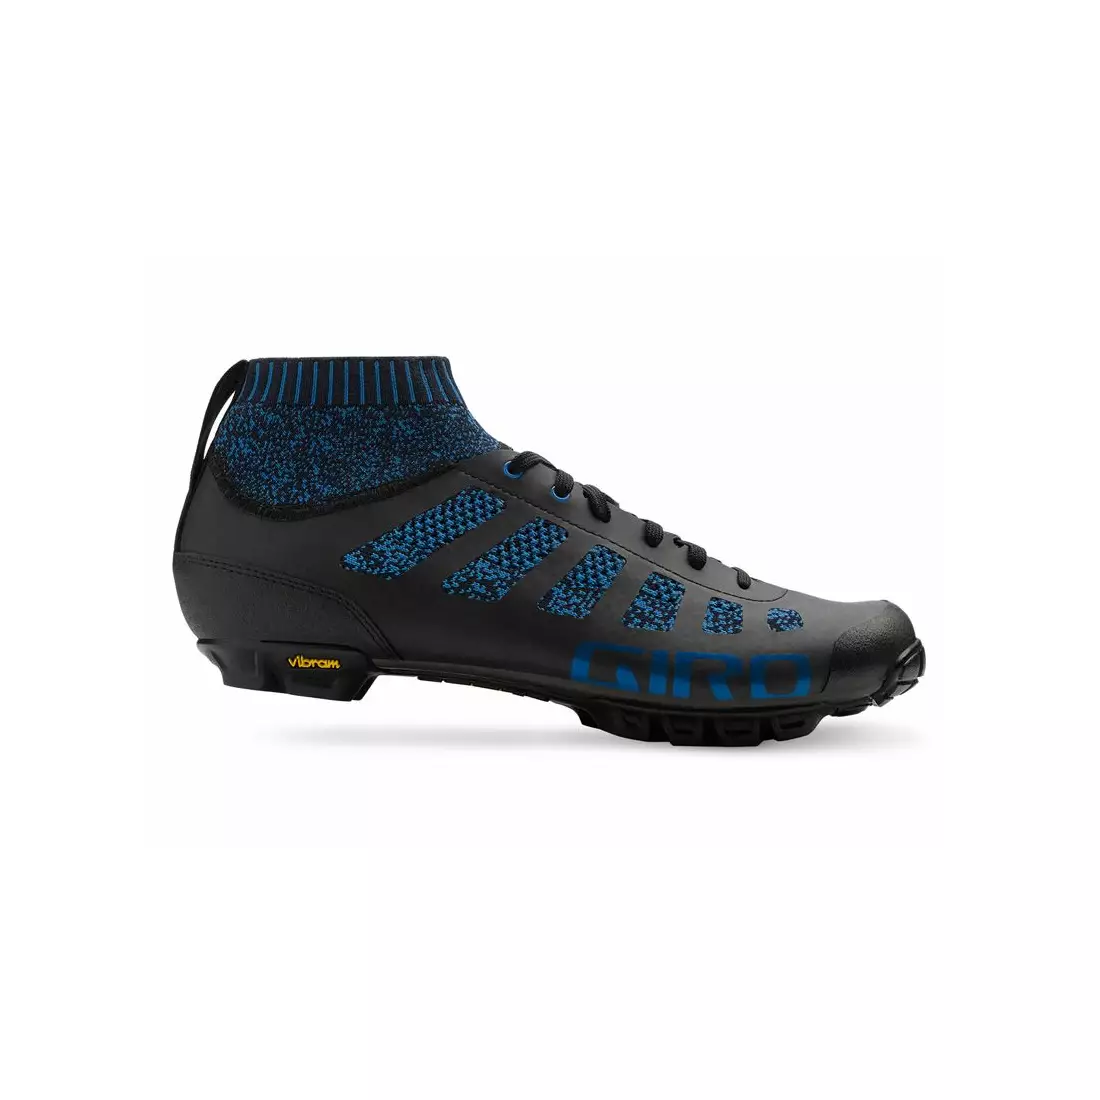 Men's bicycle boots  GIRO EMPIRE VR70 Knit midnight blue 